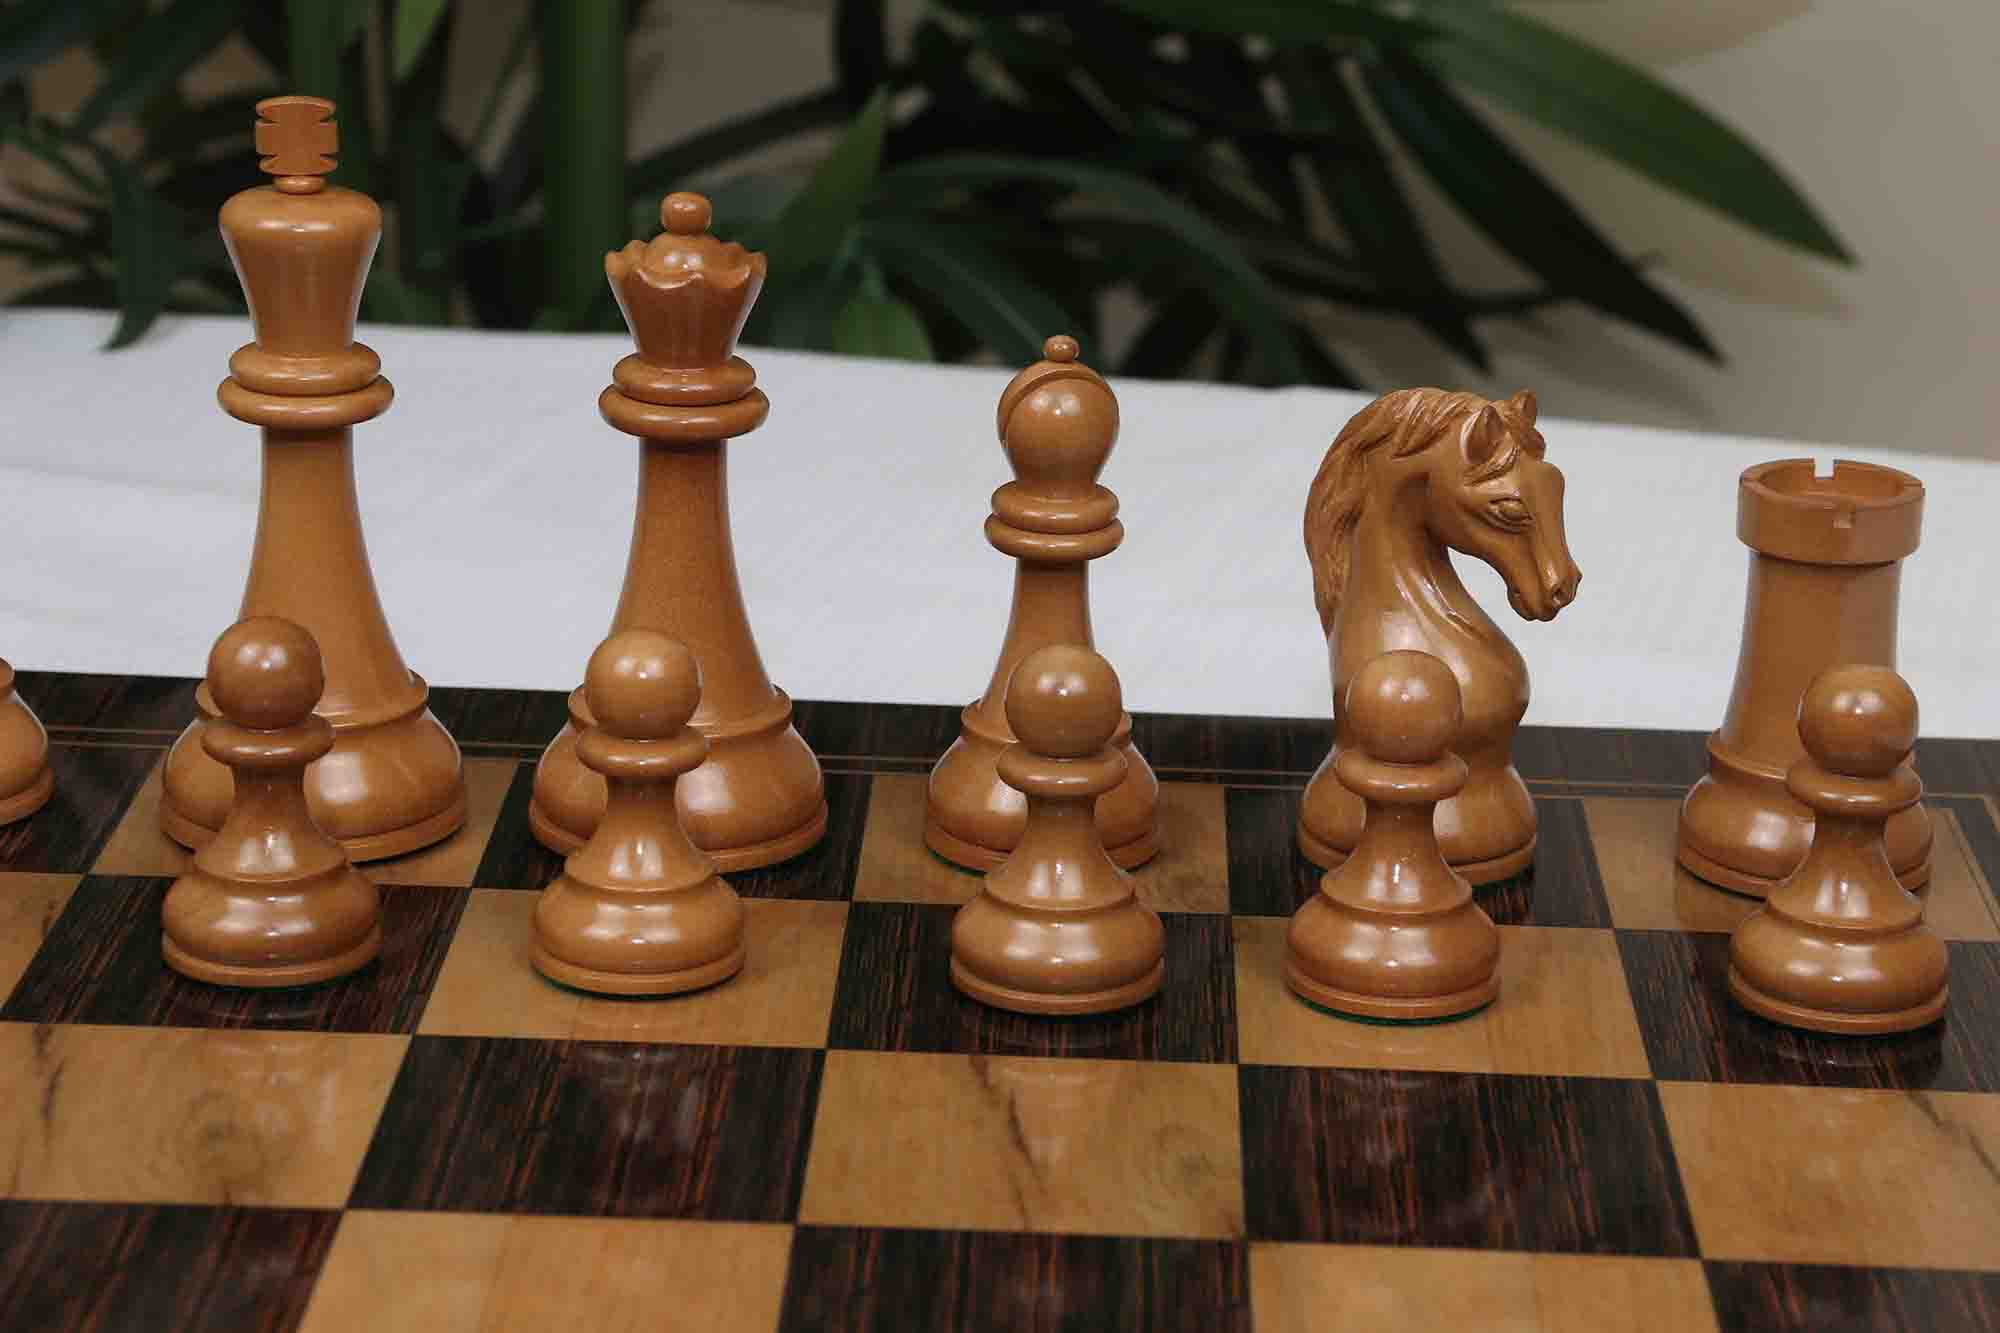 The Herman Steiner Commemorative Series Chess Pieces in Antiqued Boxwood and Ebony - 5.0" King